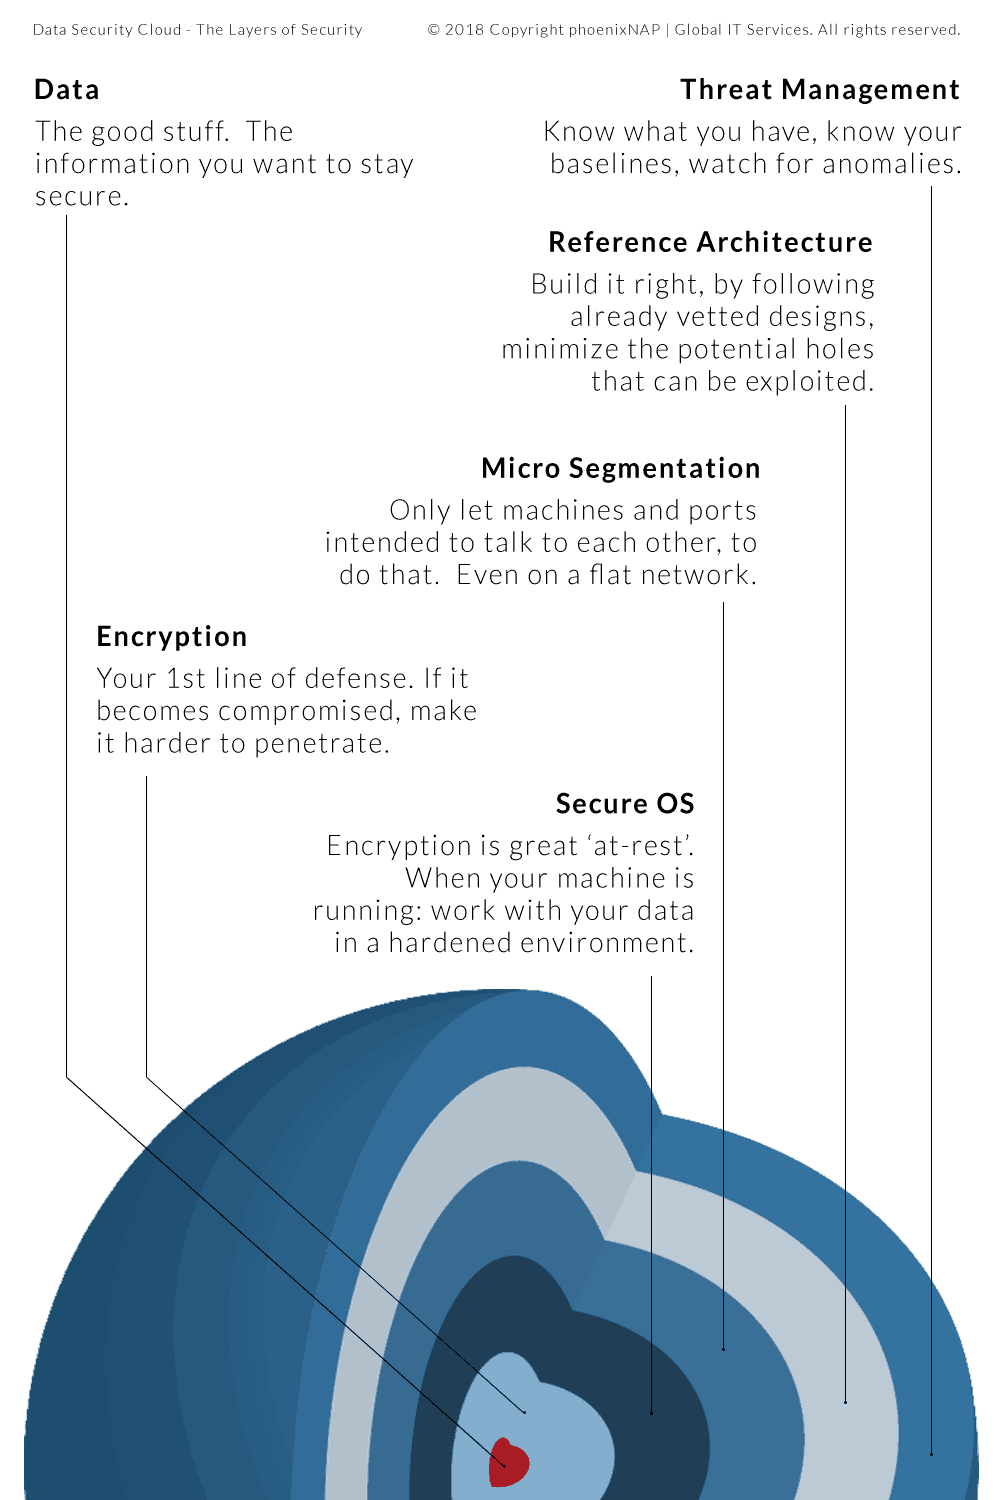 data-security-cloud-layers-of-security-1.png